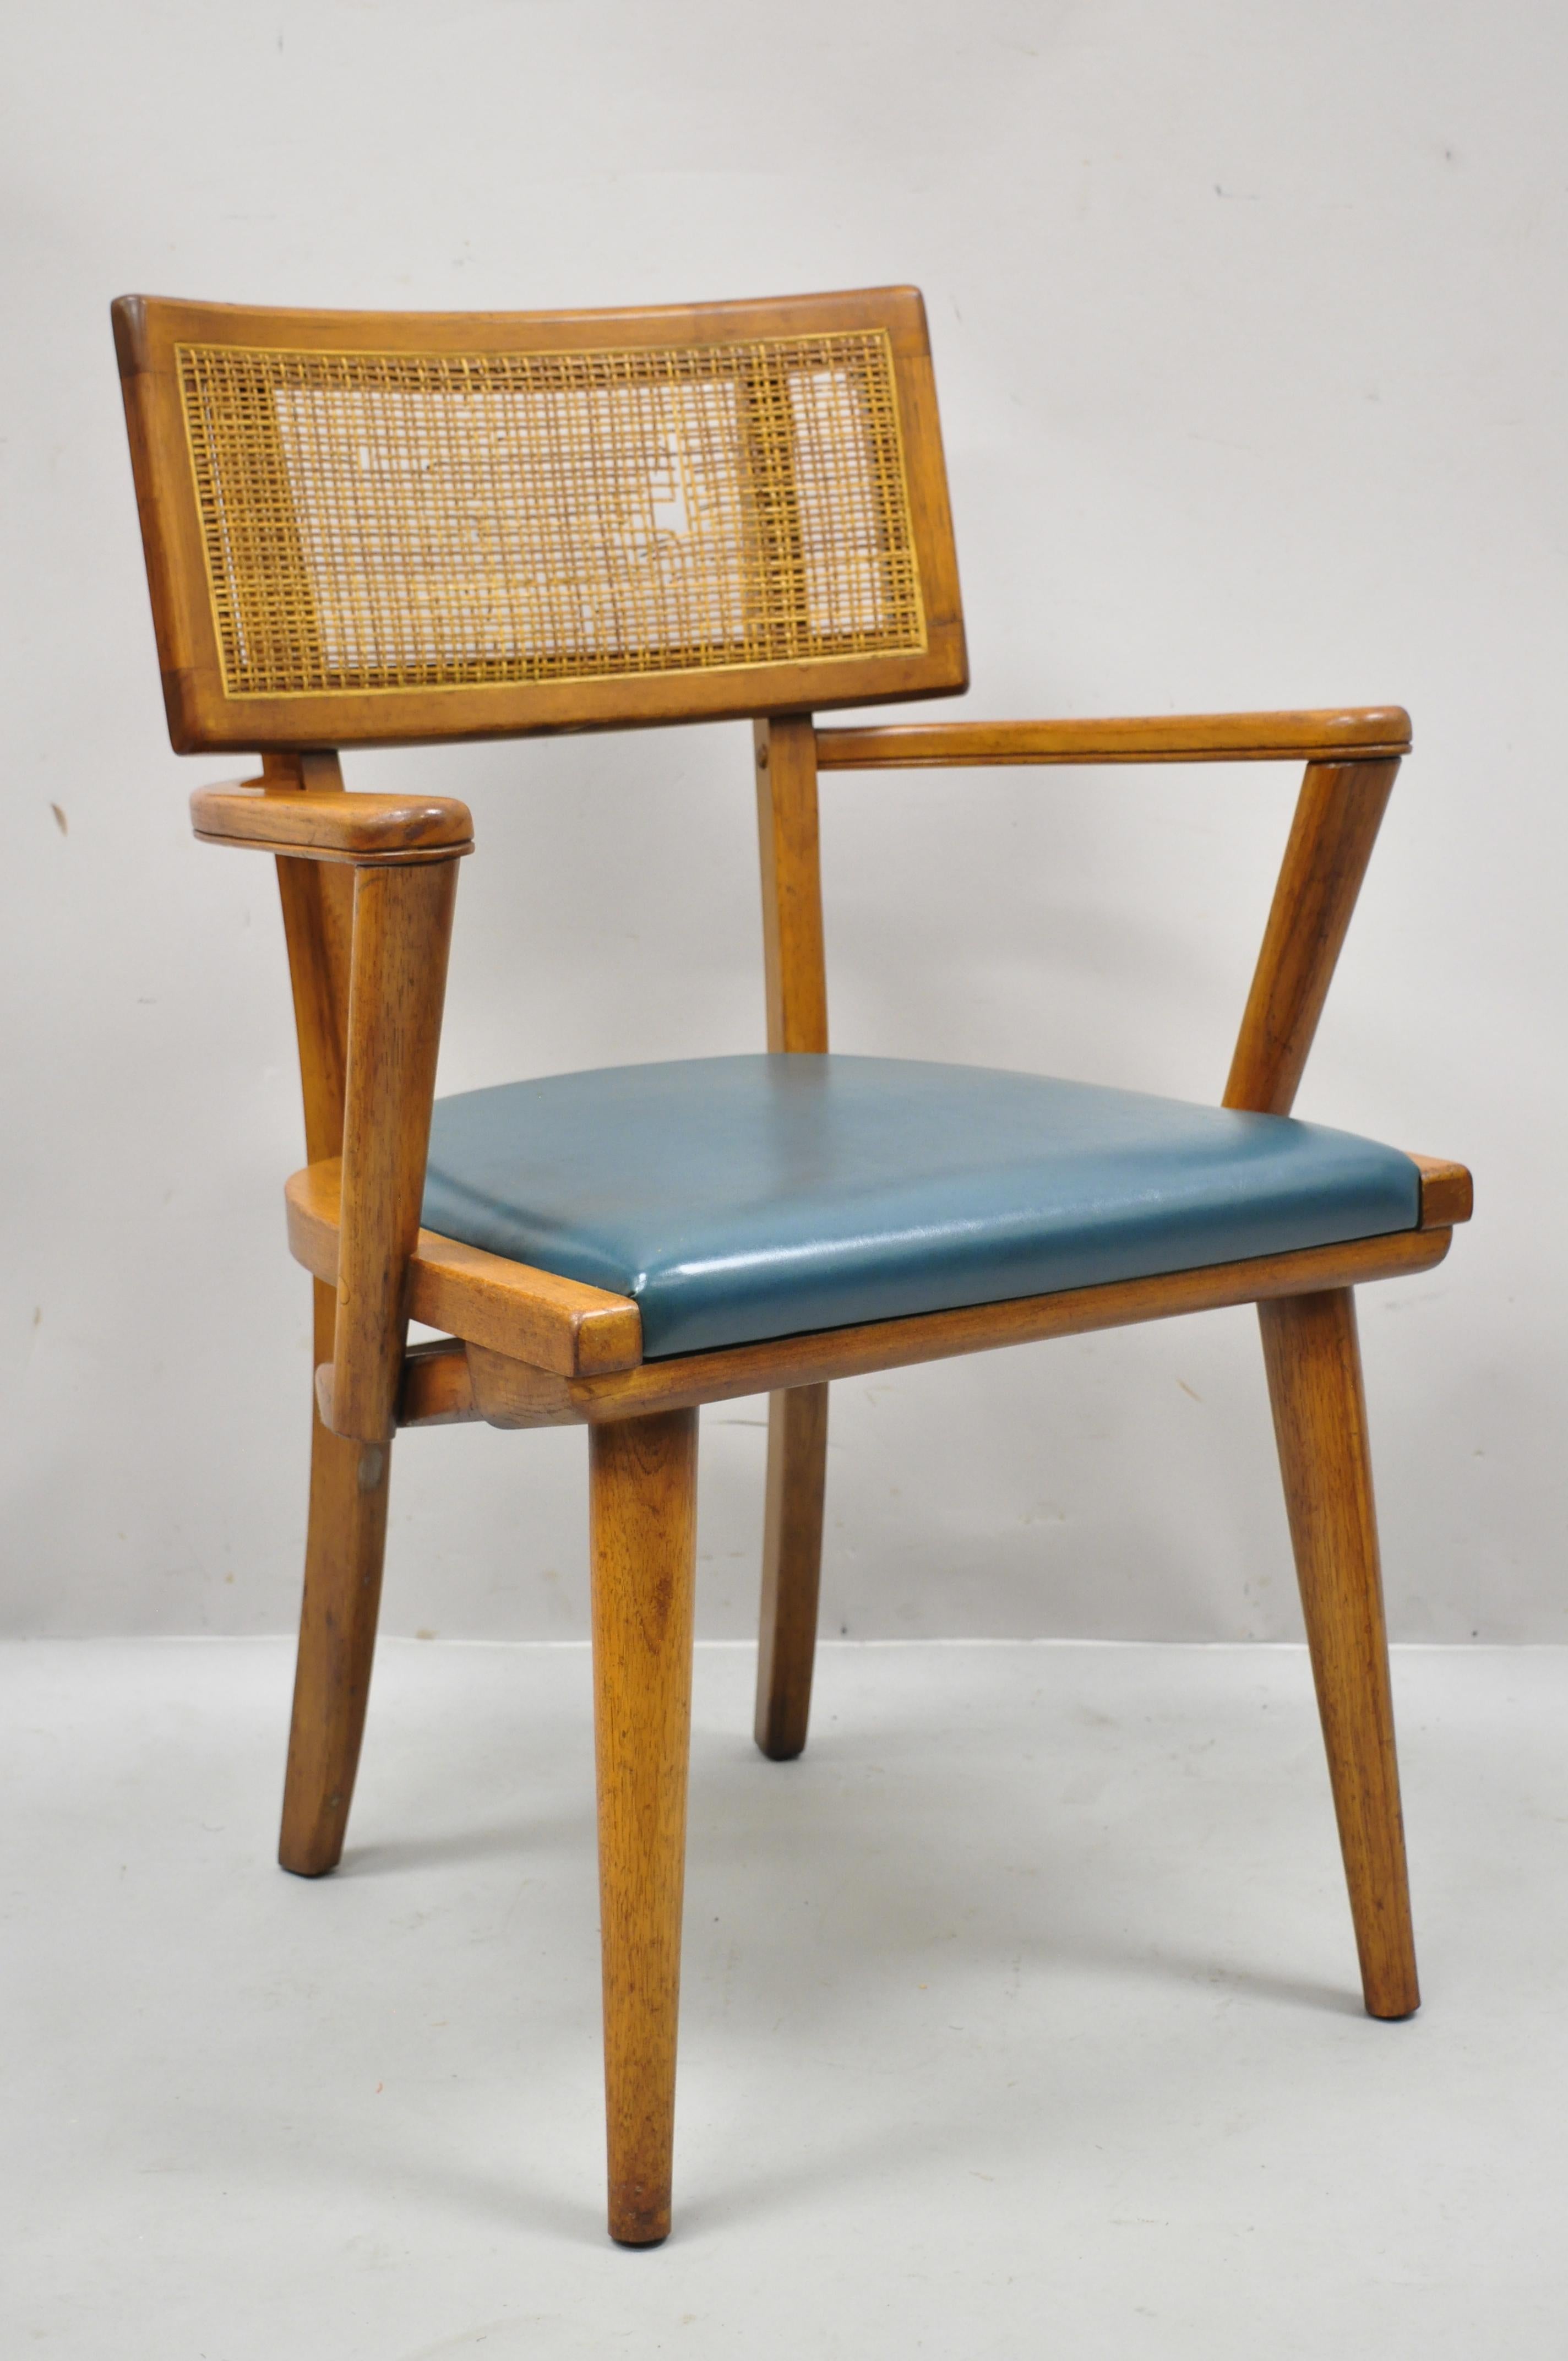 The Boling Changebak chair walnut cane back mid century by Boling Chair Co. (A). Item features cane back, 